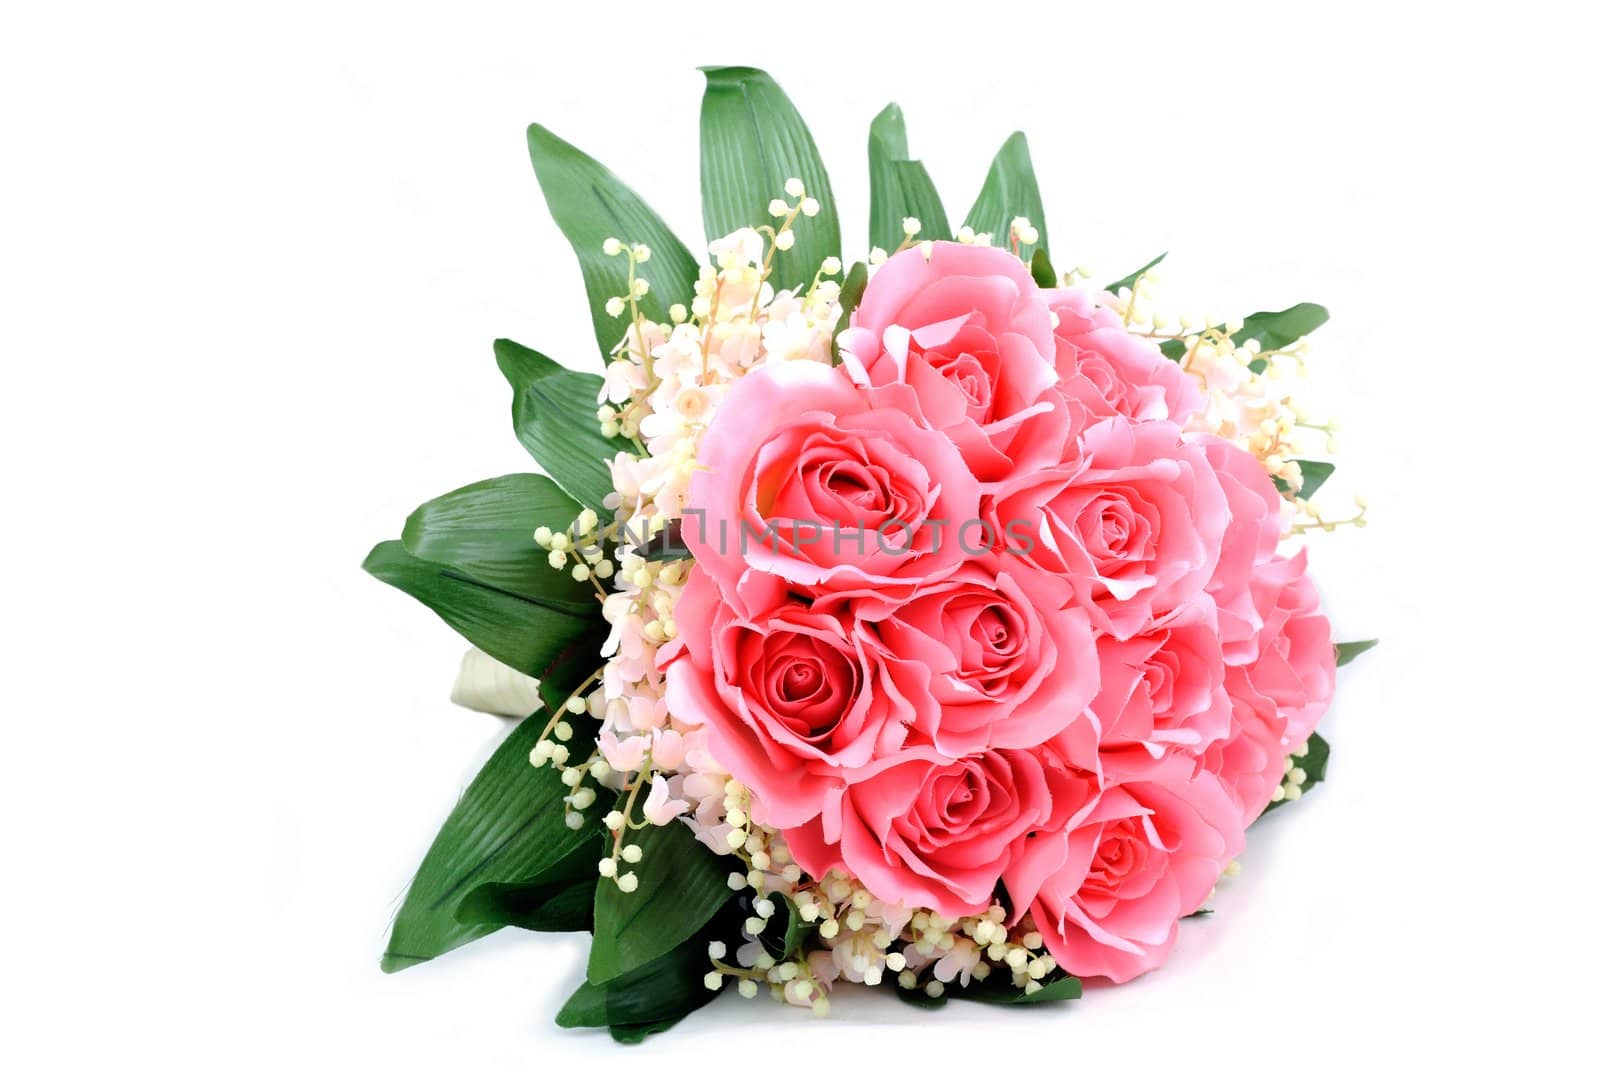 Bouquet of pink fabric roses isolated on white background.